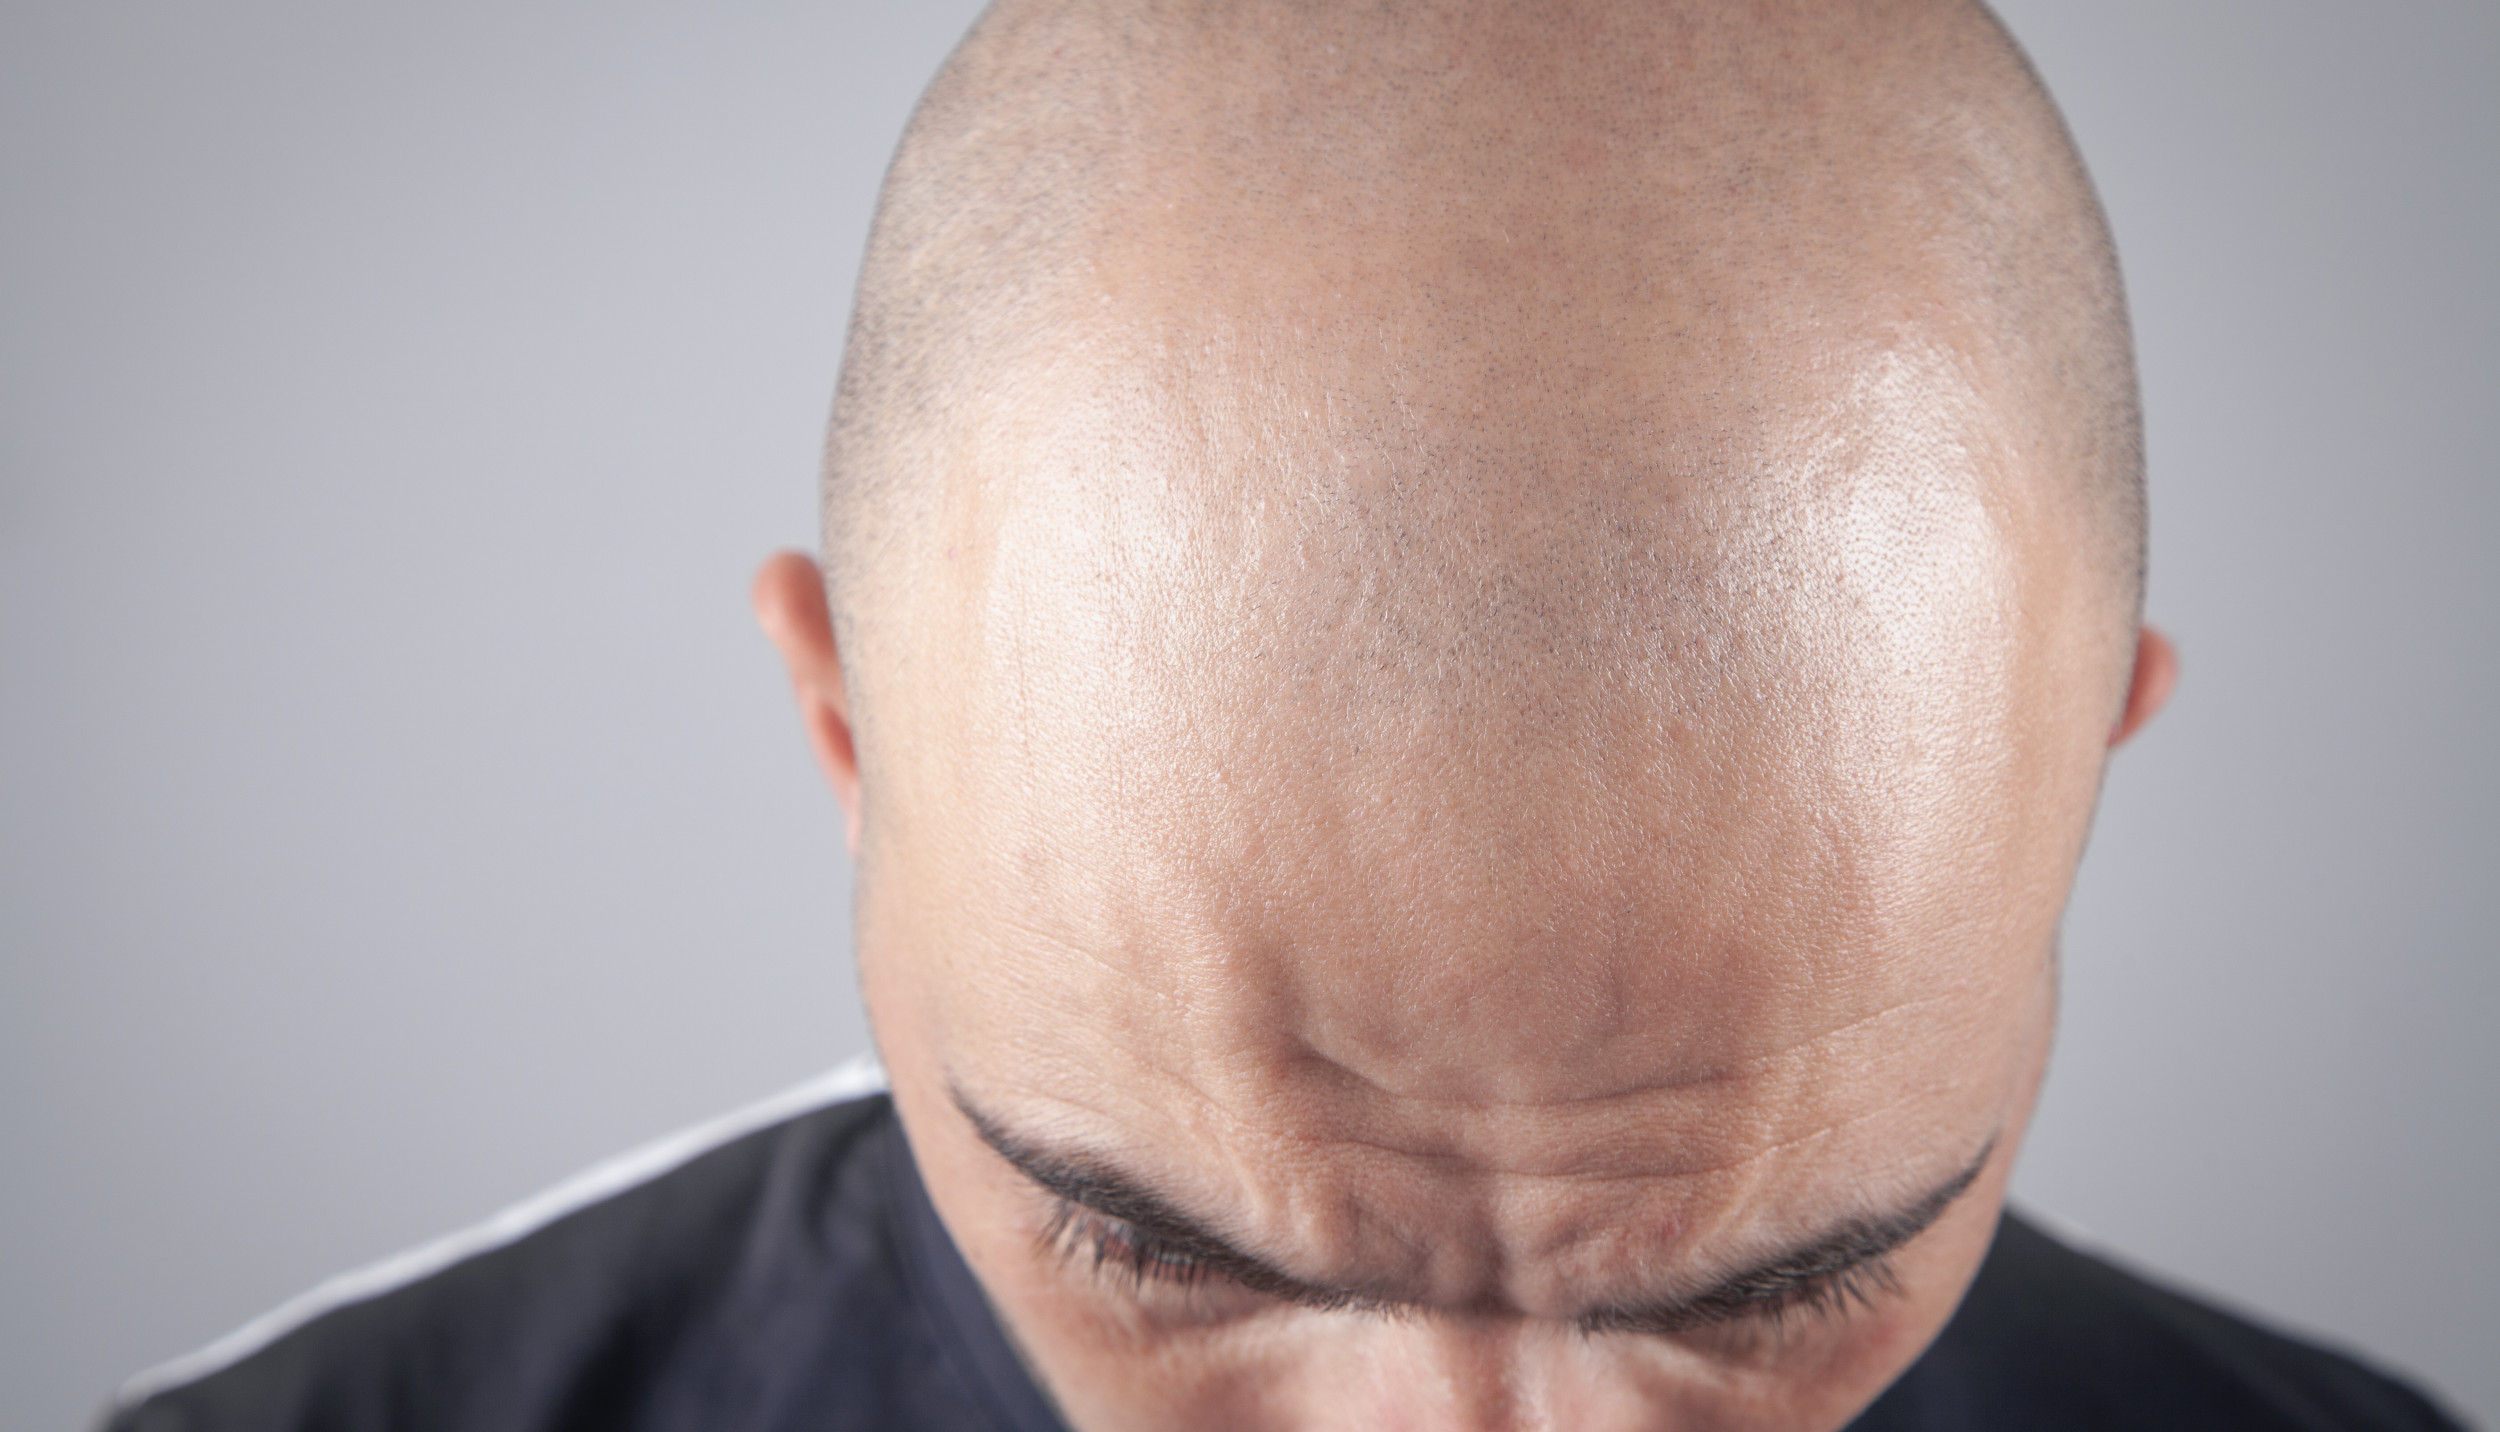 Bald White Men Seen as Less Attractive, but No Difference for Black Men